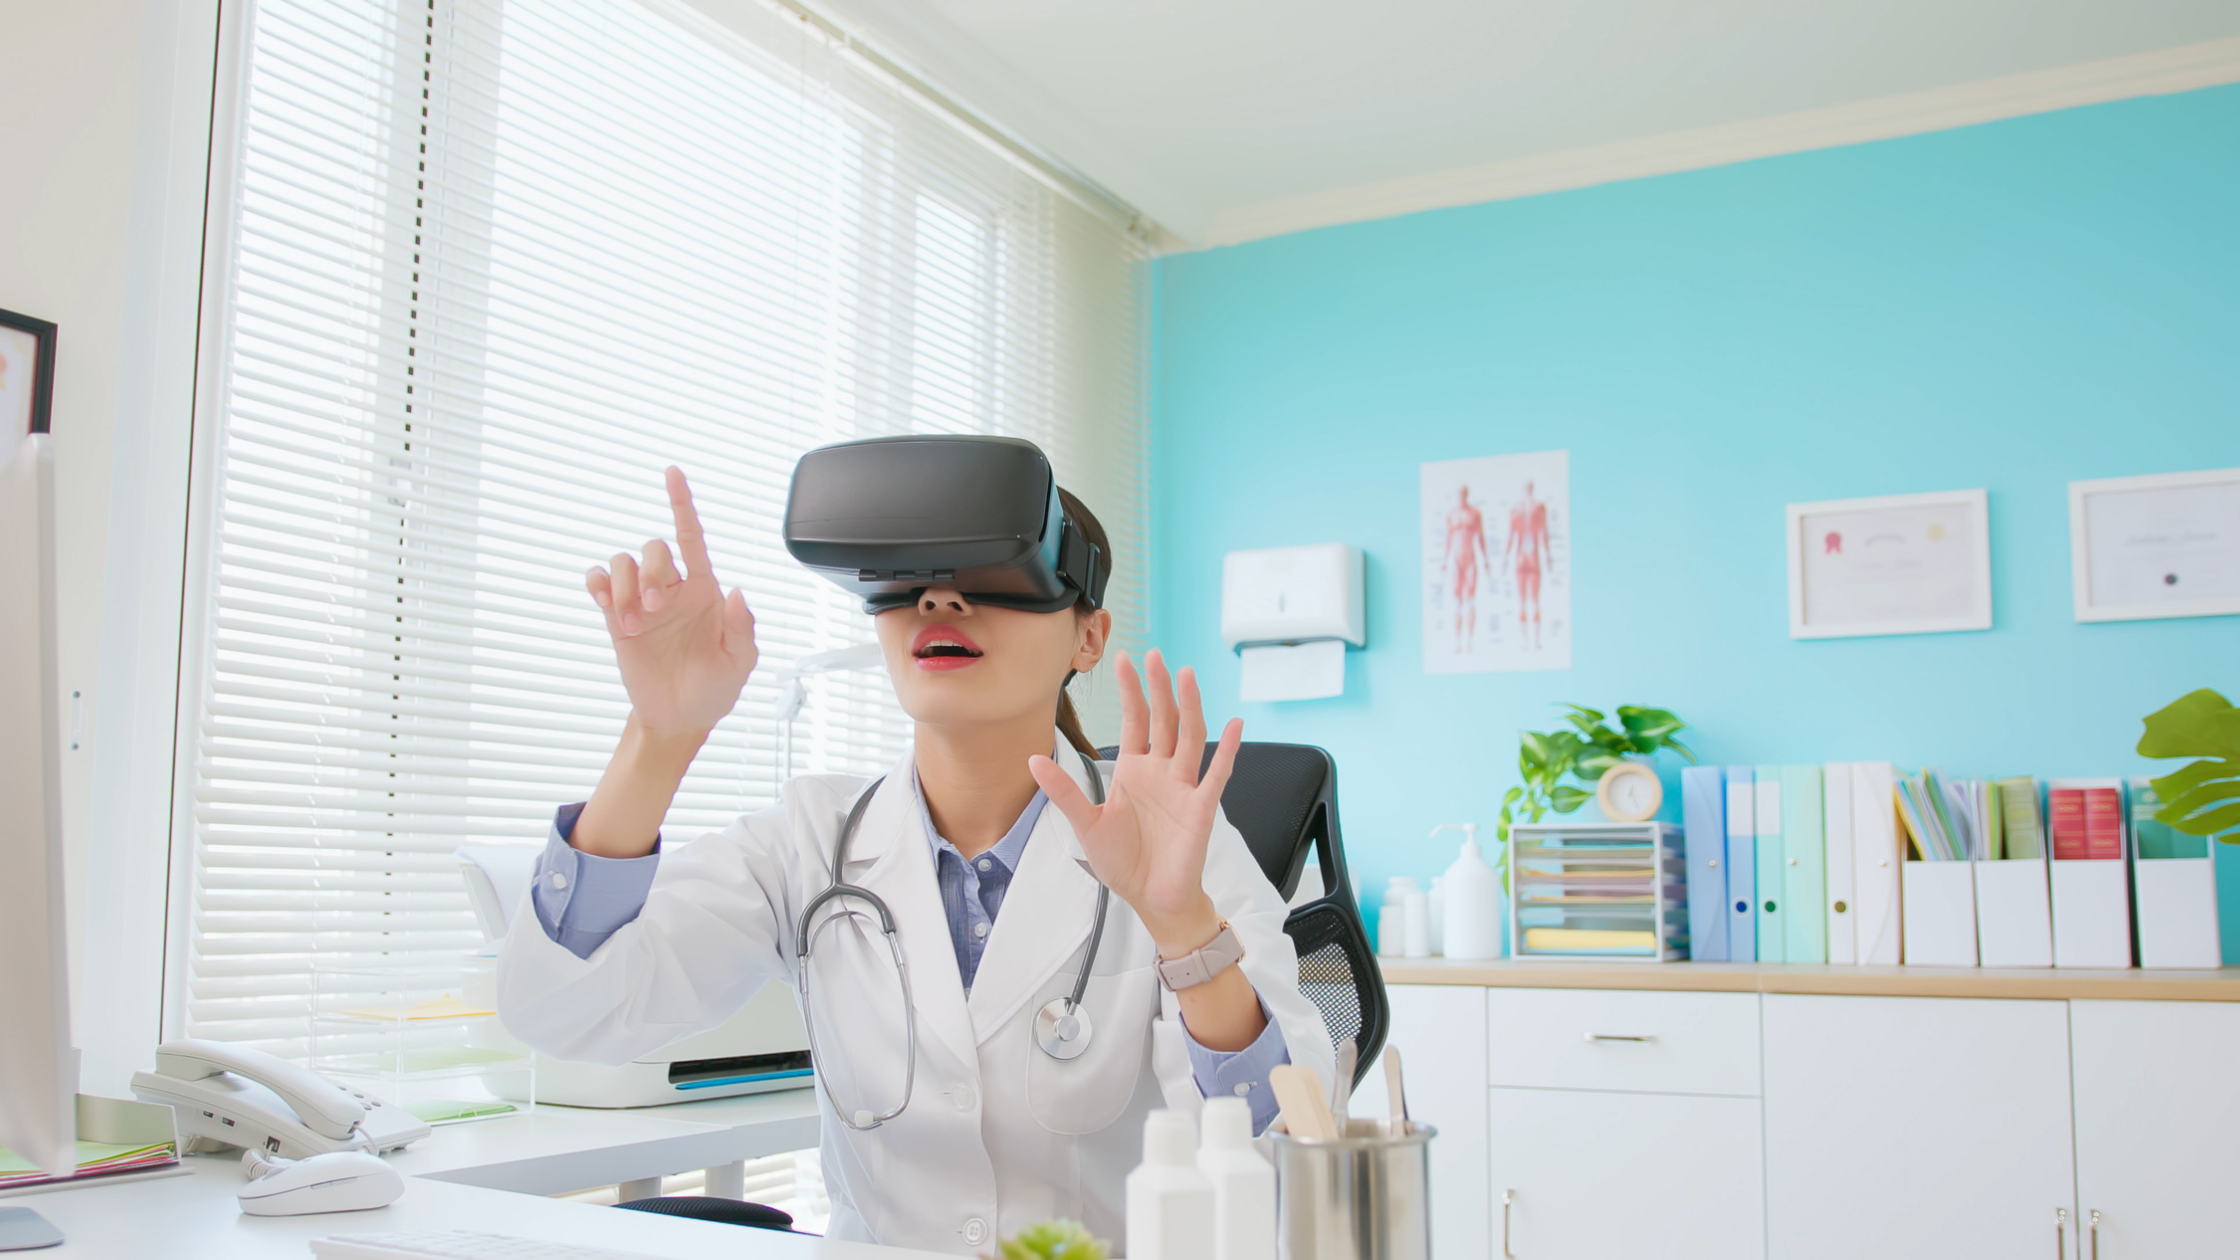 VR Applications in Healthcare